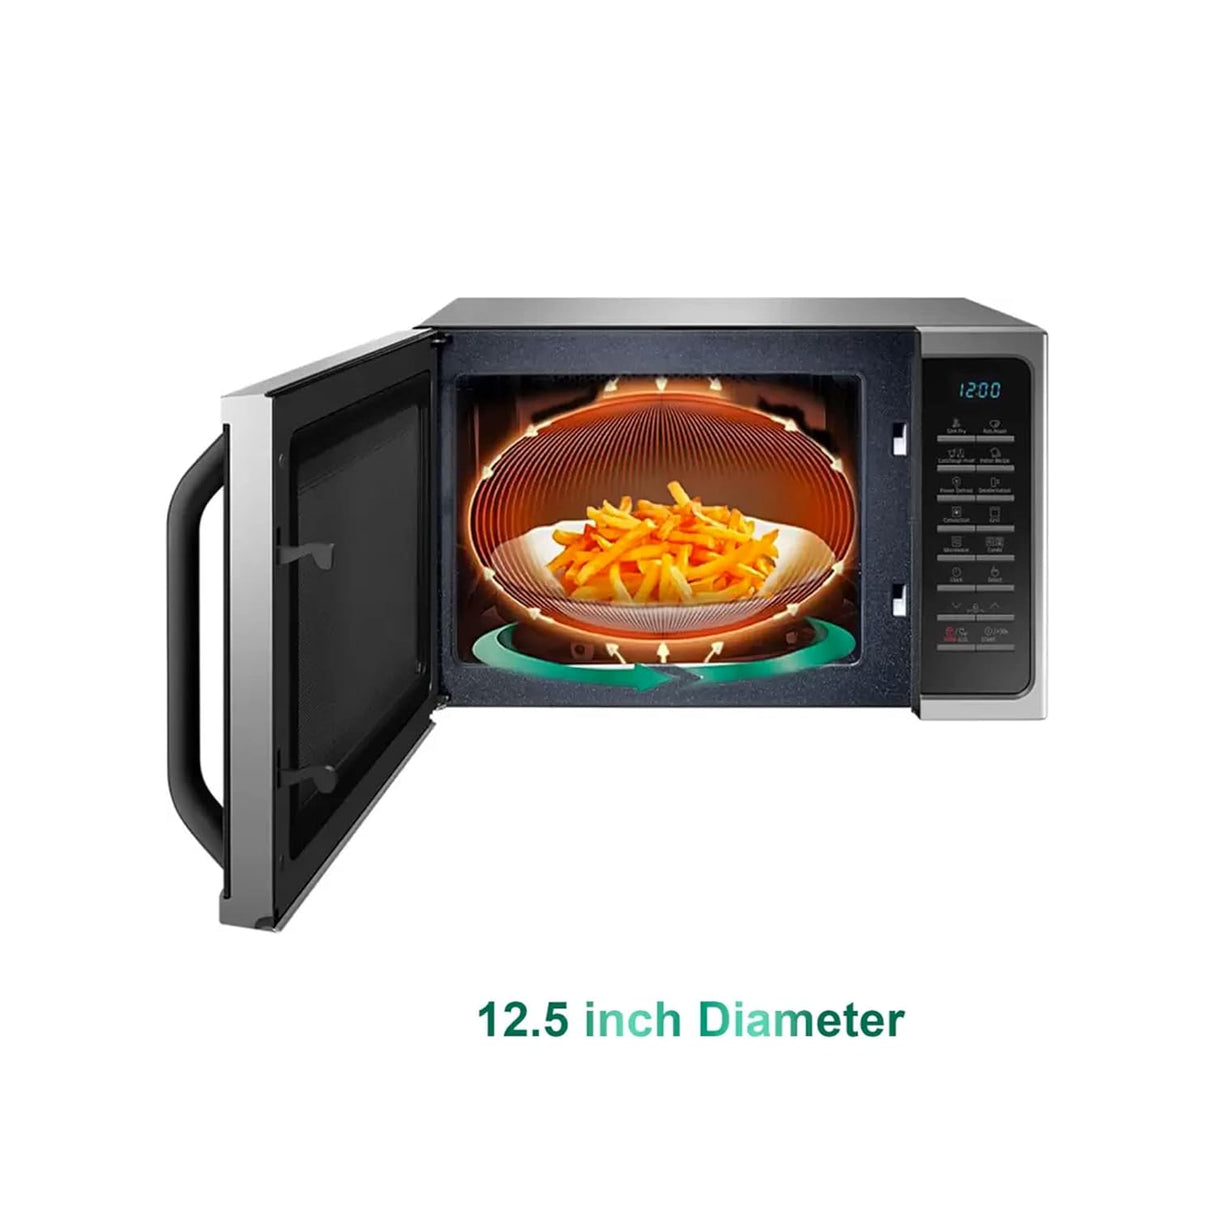 Effortless cooking with Samsung's 28L Convection Microwave: Best choice.